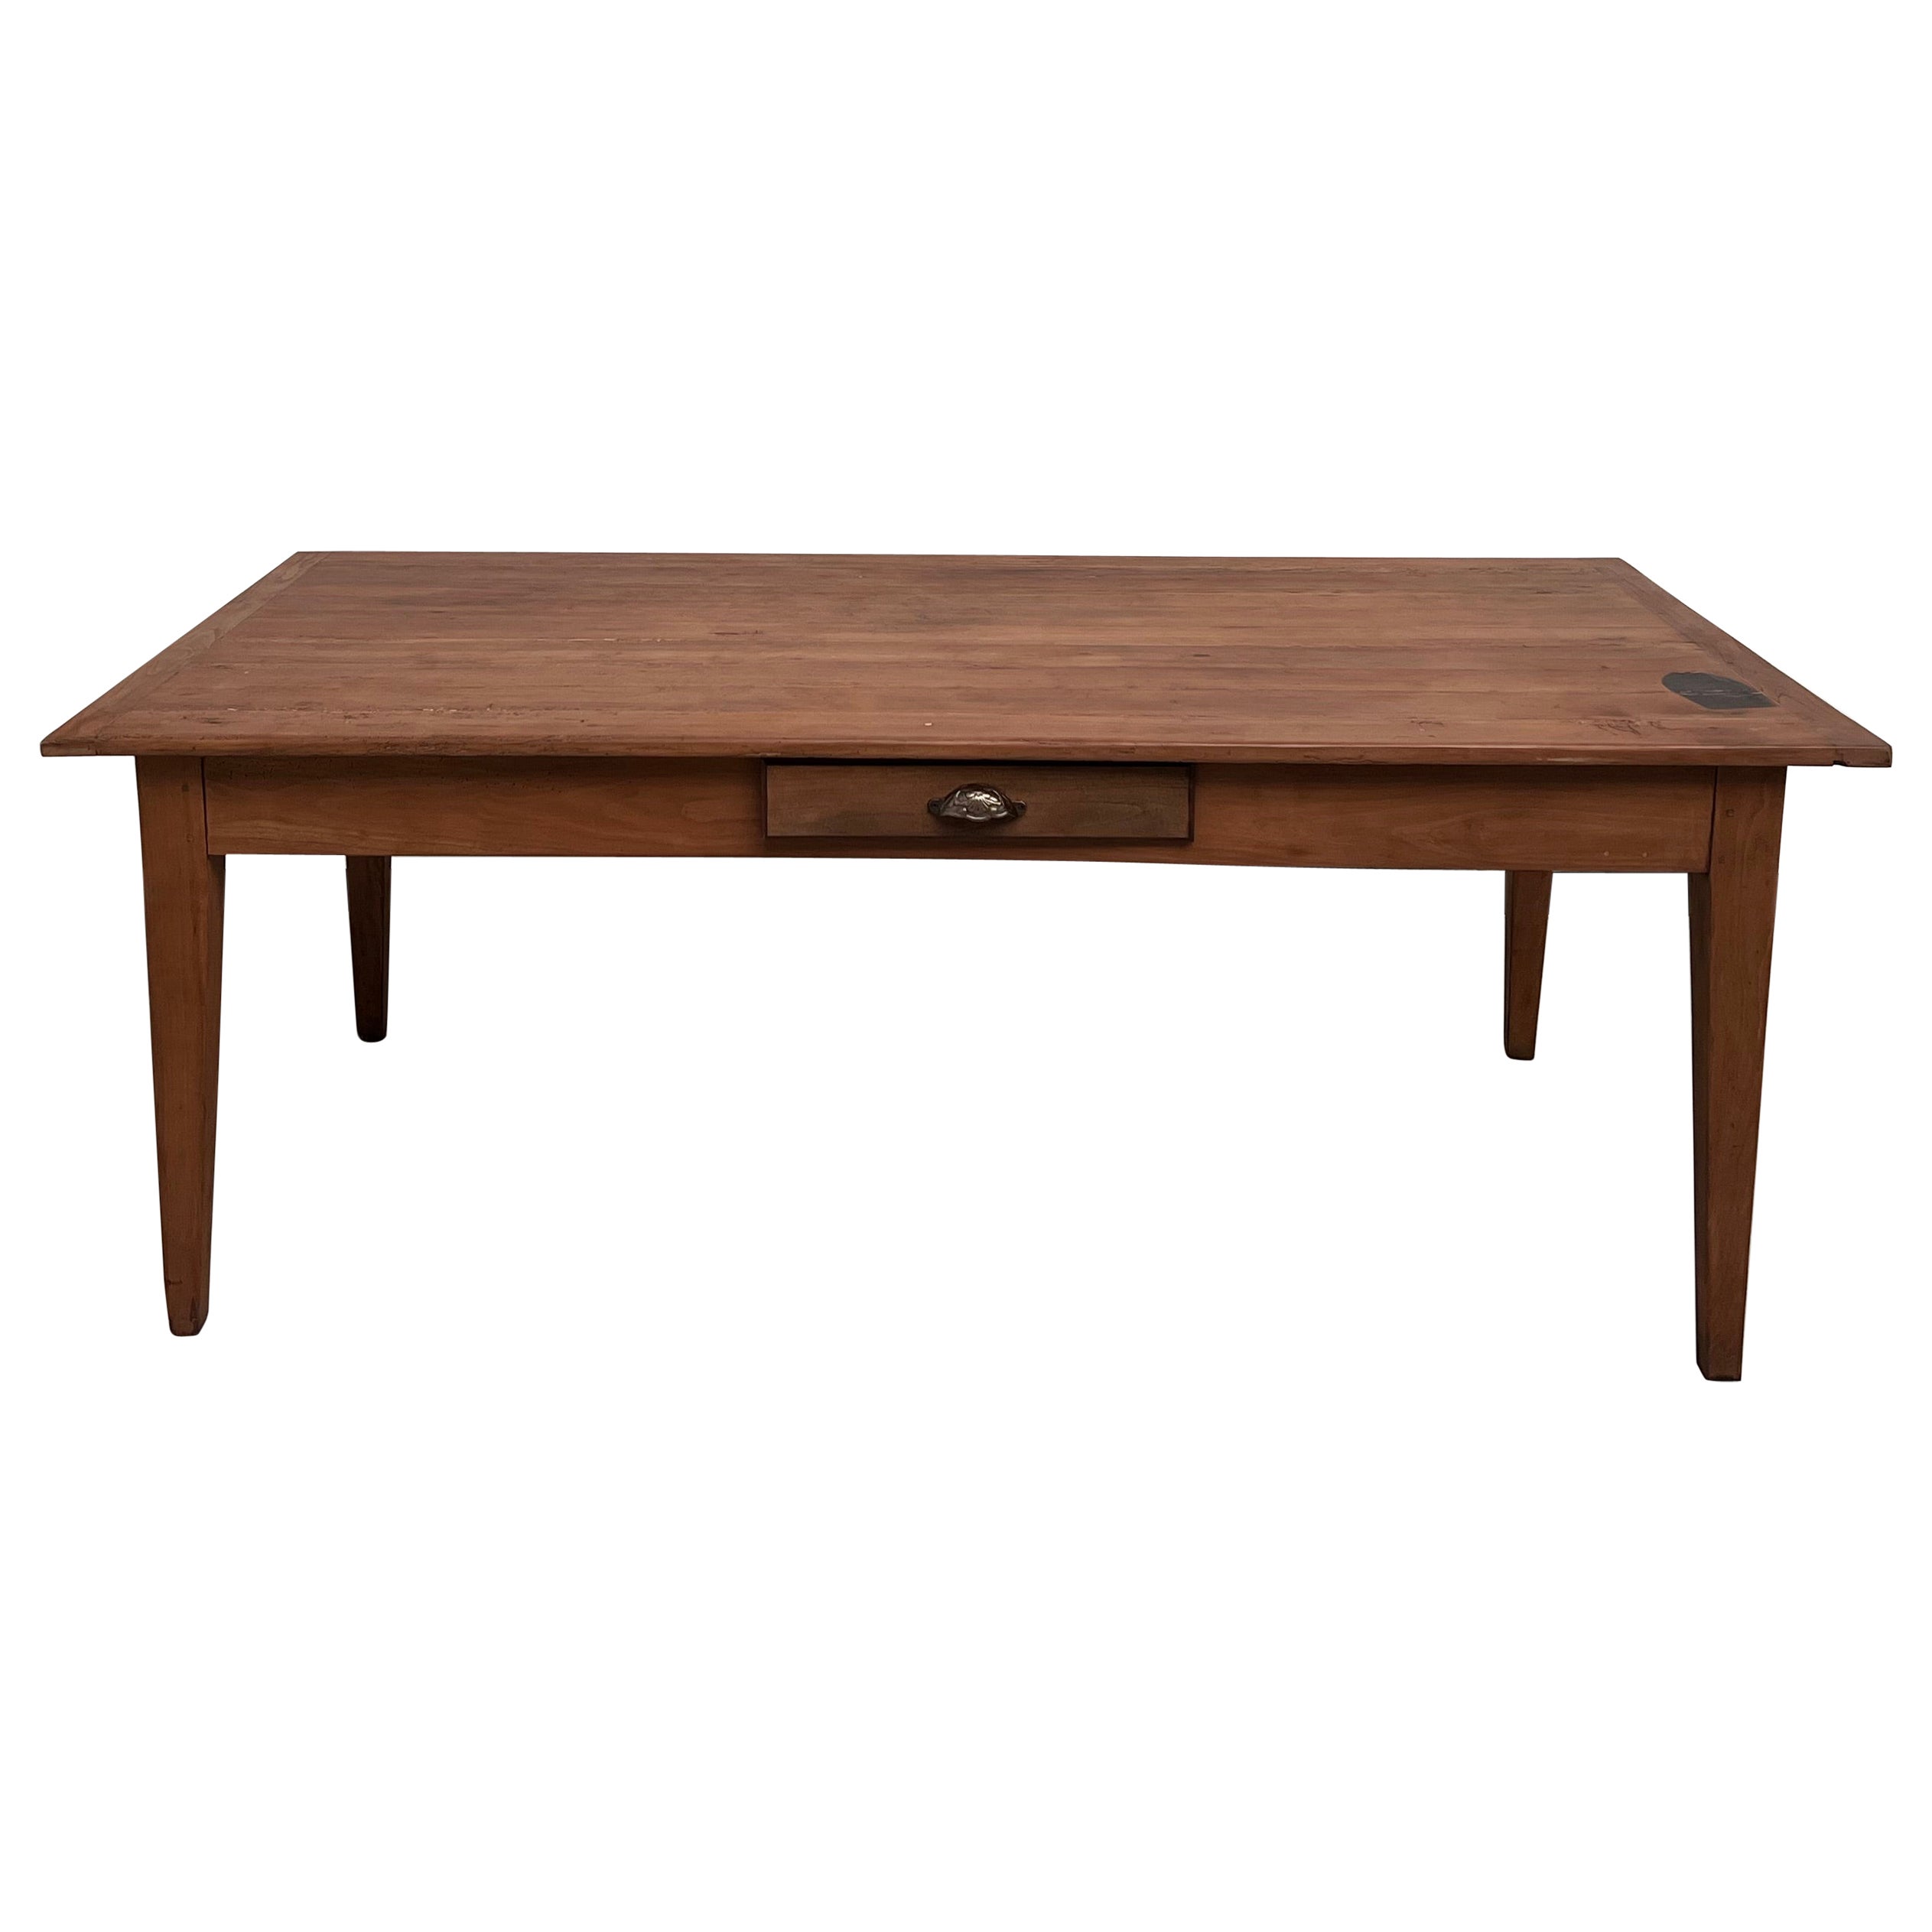 Teak farm table with spindle legs For Sale